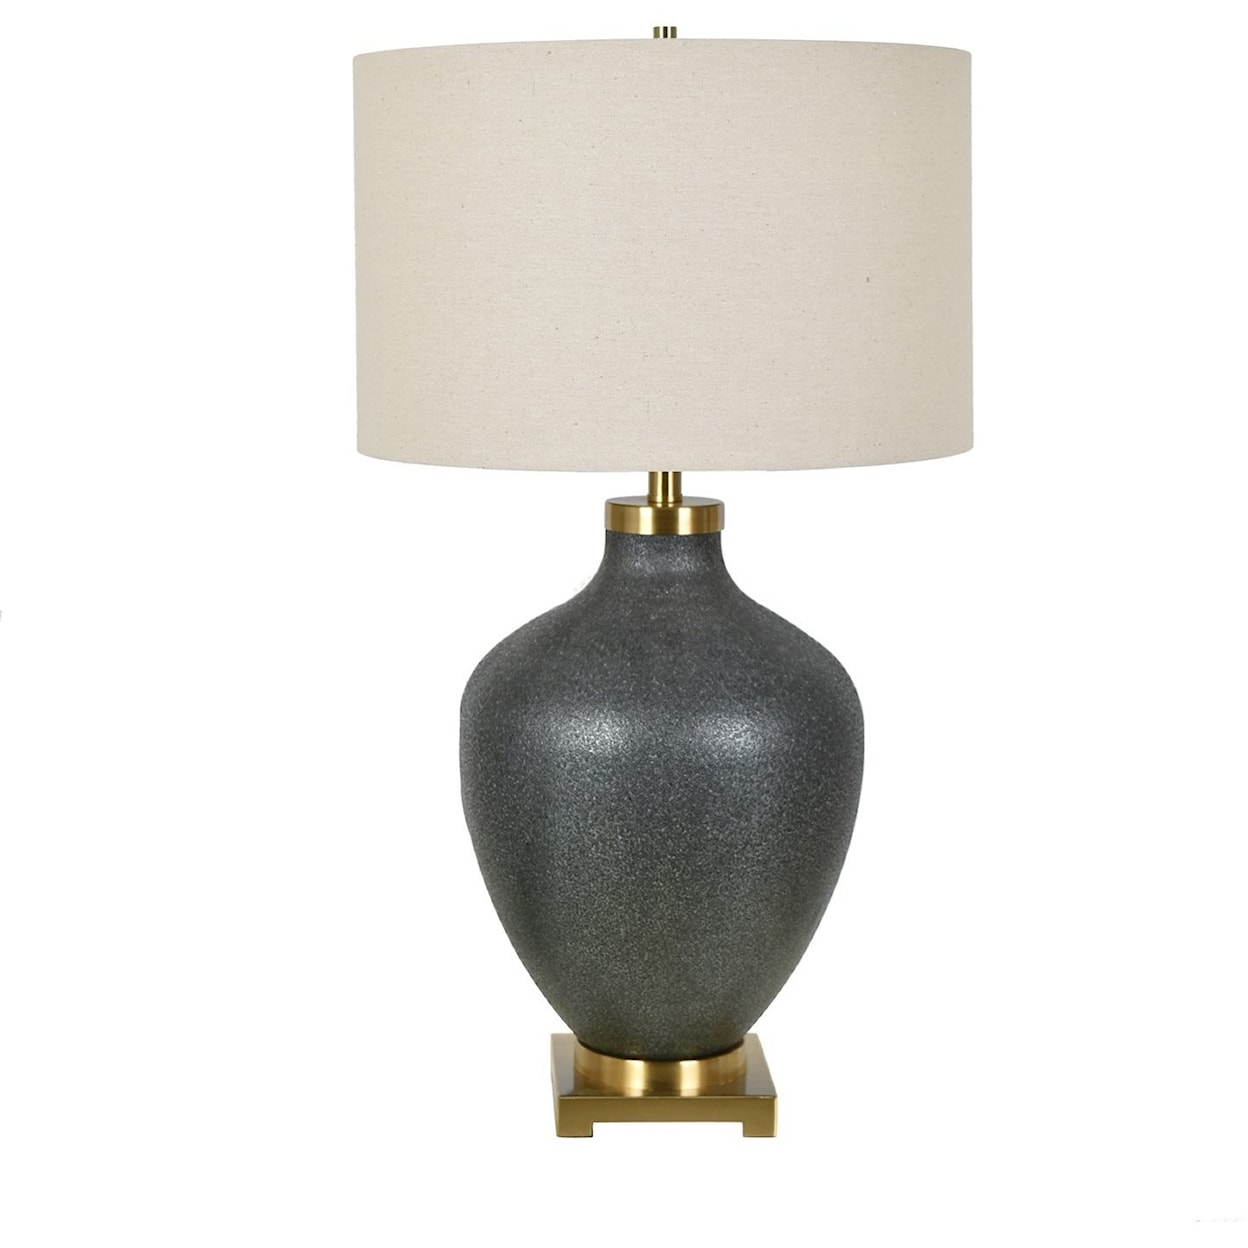 Crestview Collection Lighting Liam Table Lamp